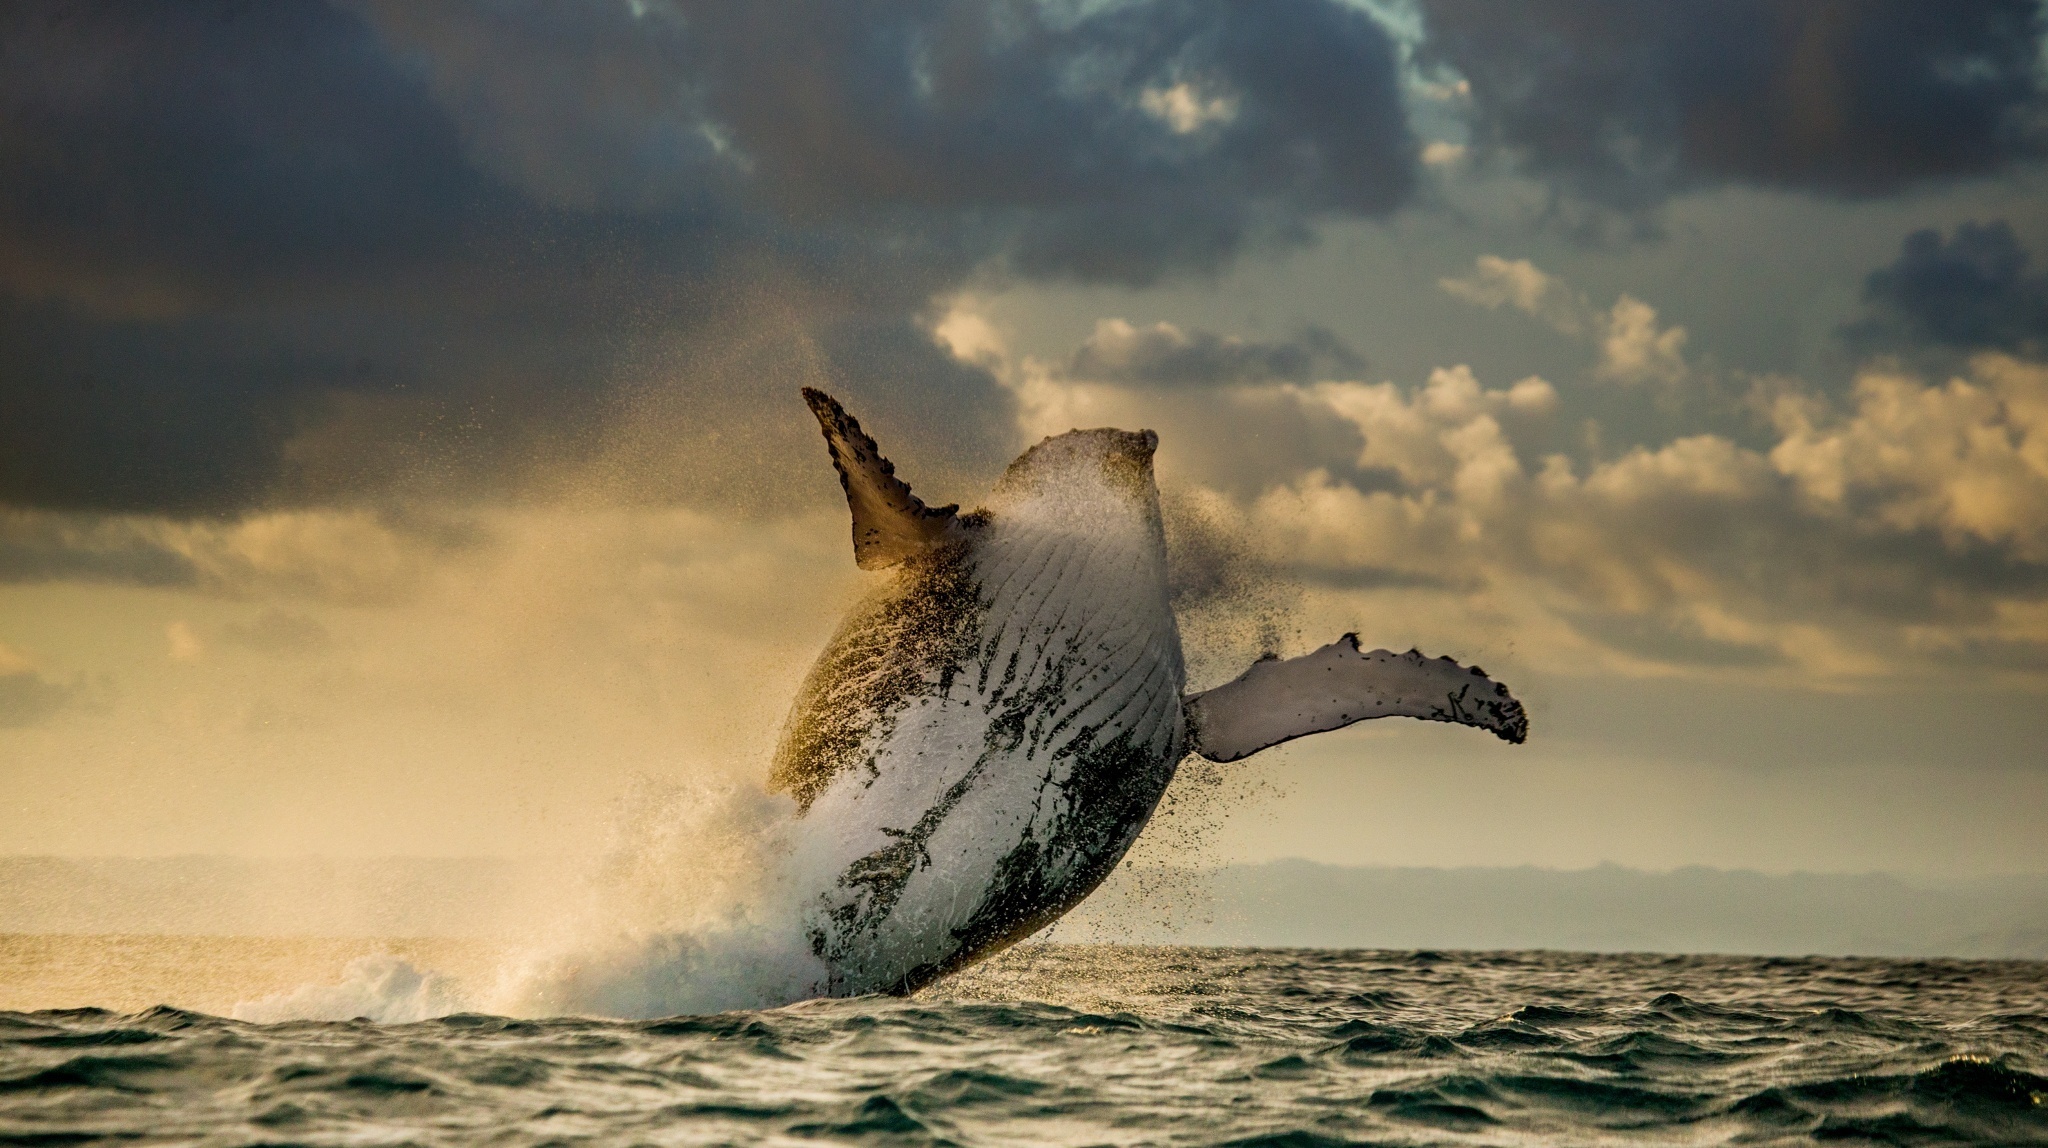 A Humpback Whale Breaching by Andrey Gudkov